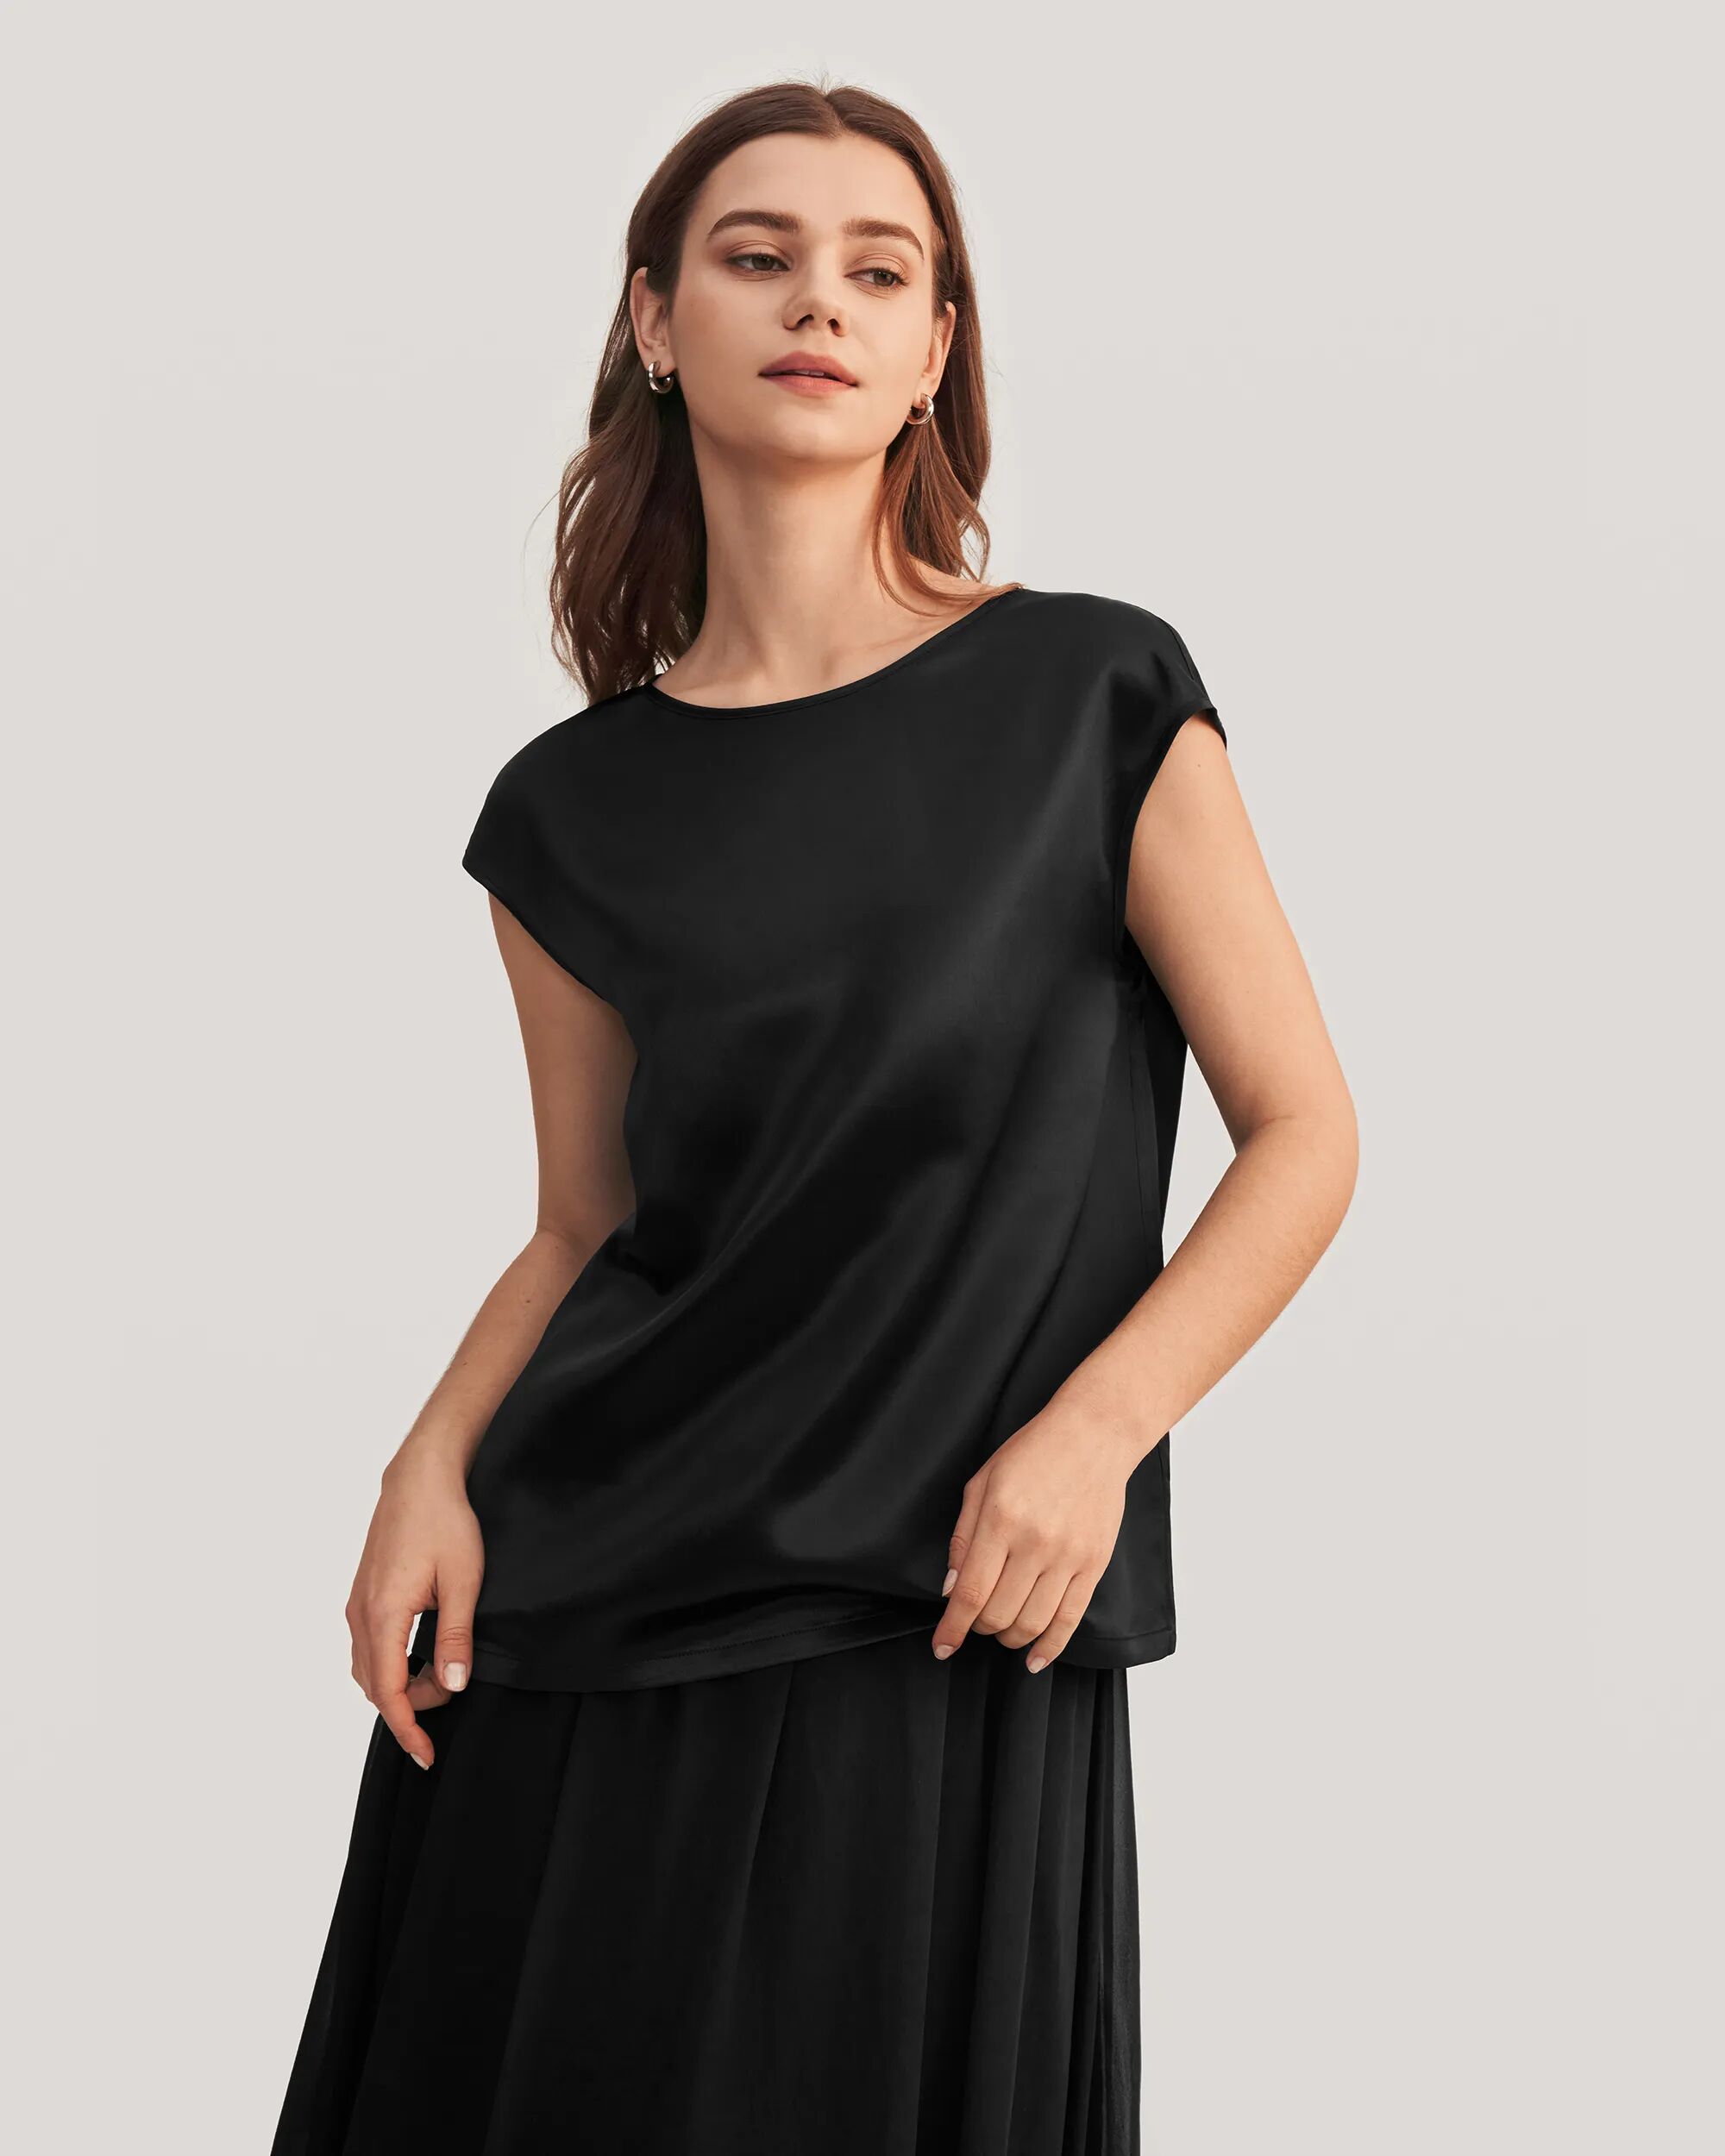 LILYSILK Casual Black Top   Silk Plain Round Neck Style Business   Women Tee Shirts 100% Grade 6A Mulberry Smooth Basic Light Soft XS